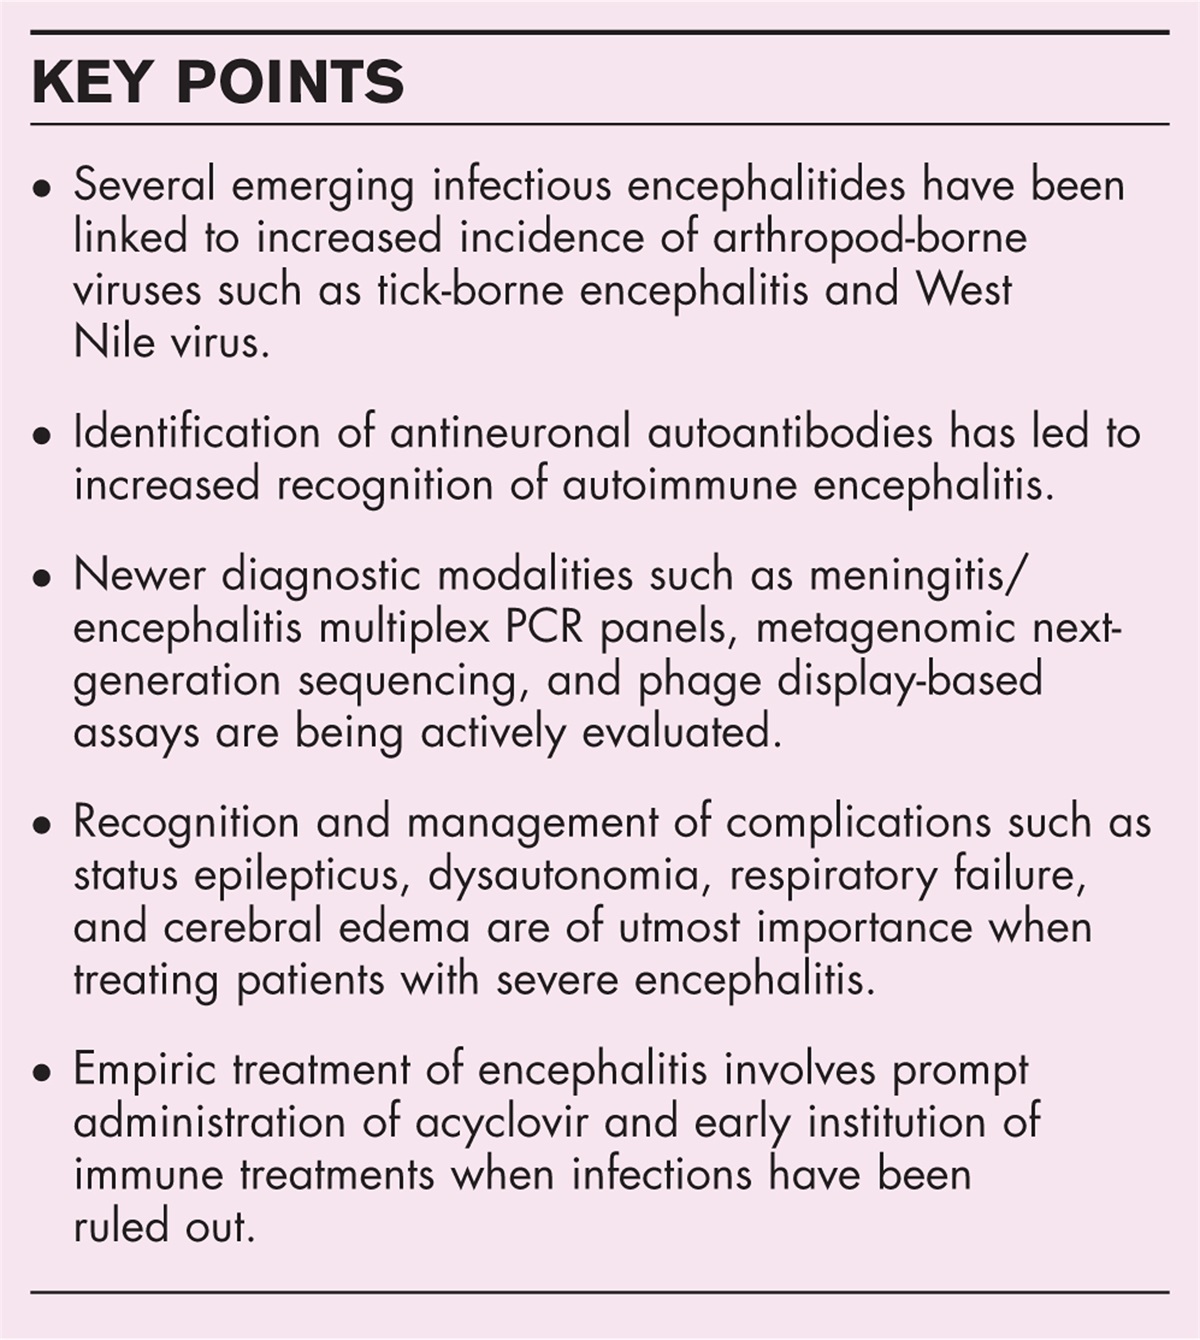 Approach to acute encephalitis in the intensive care unit